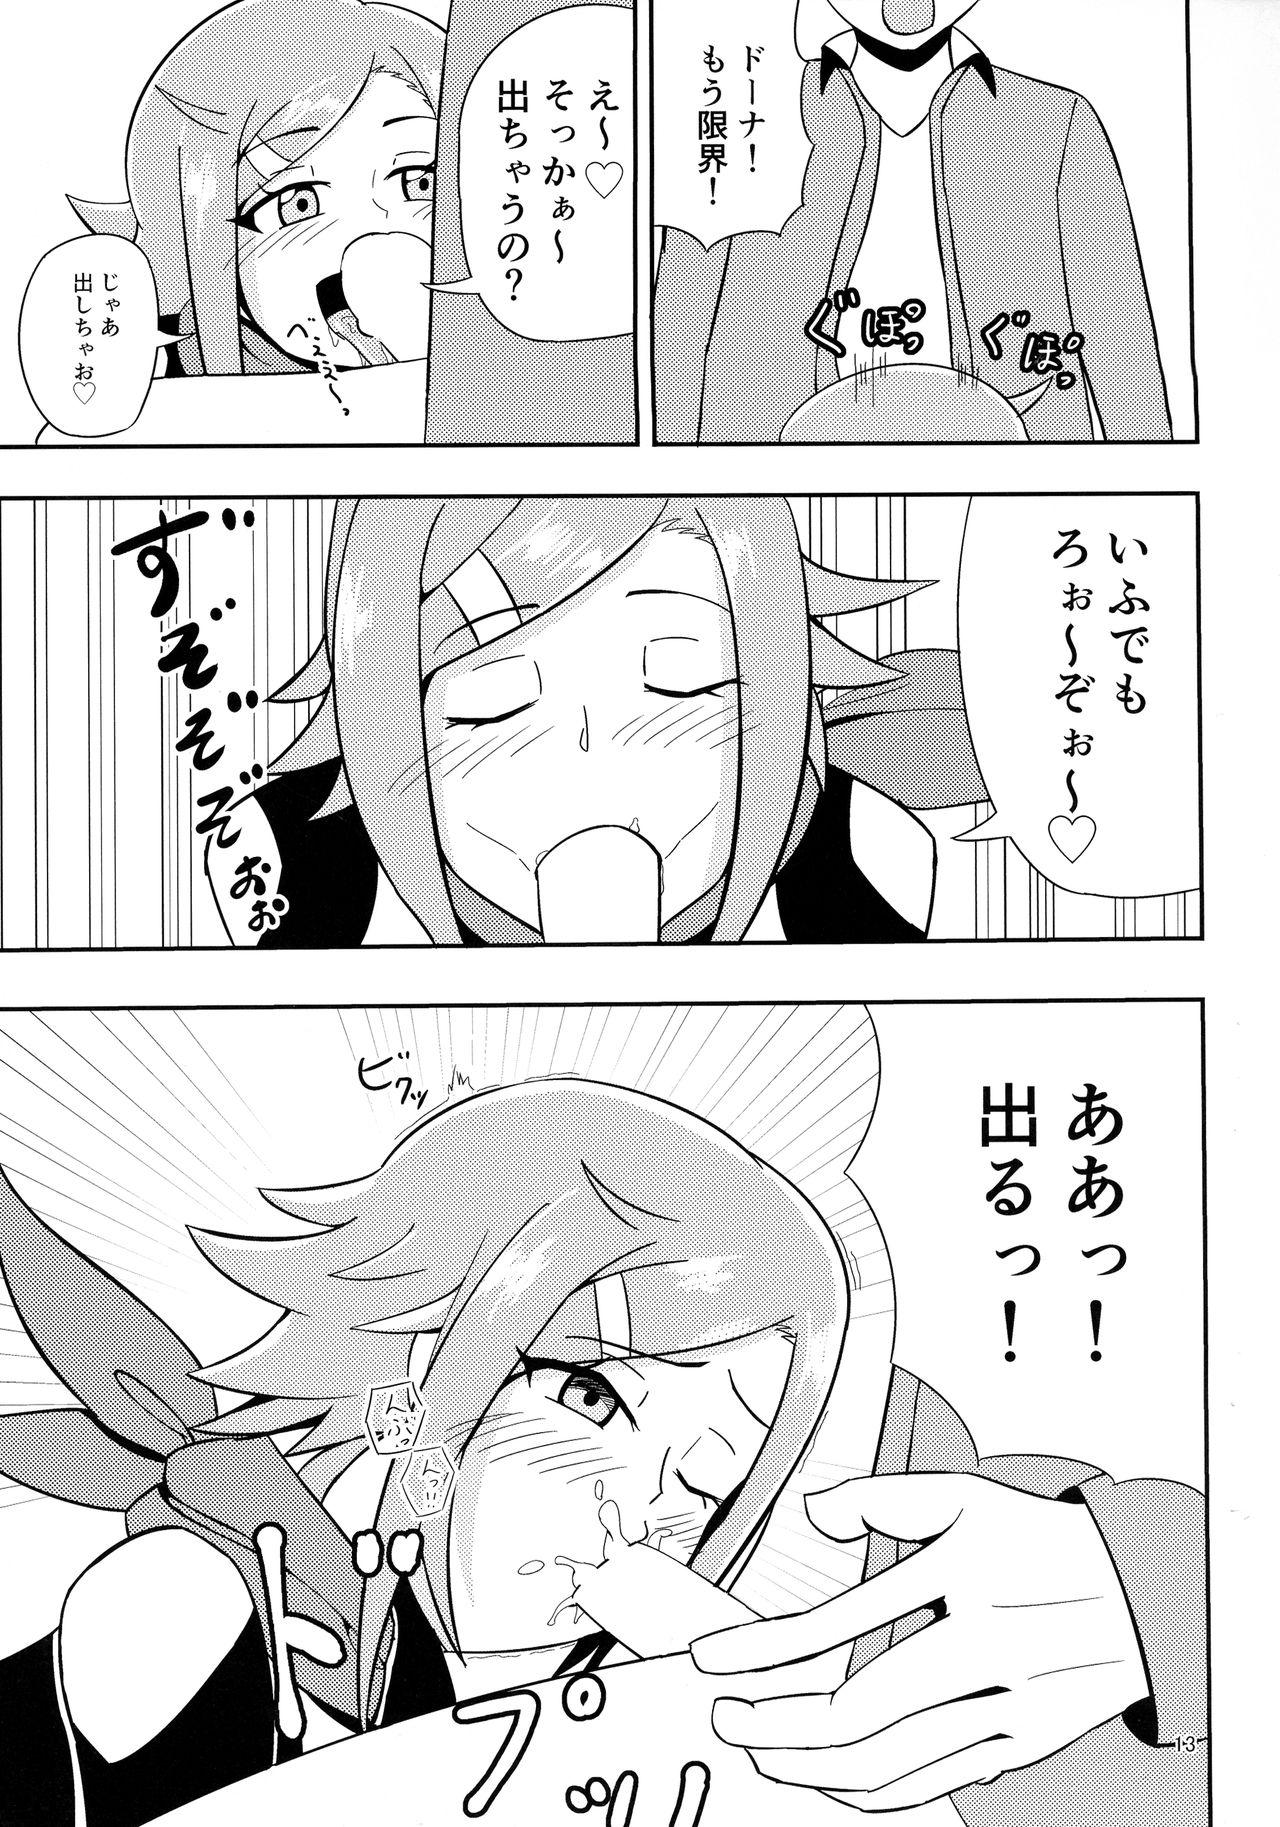 Work Party Shiyou! - Selector infected wixoss Ebony - Page 13